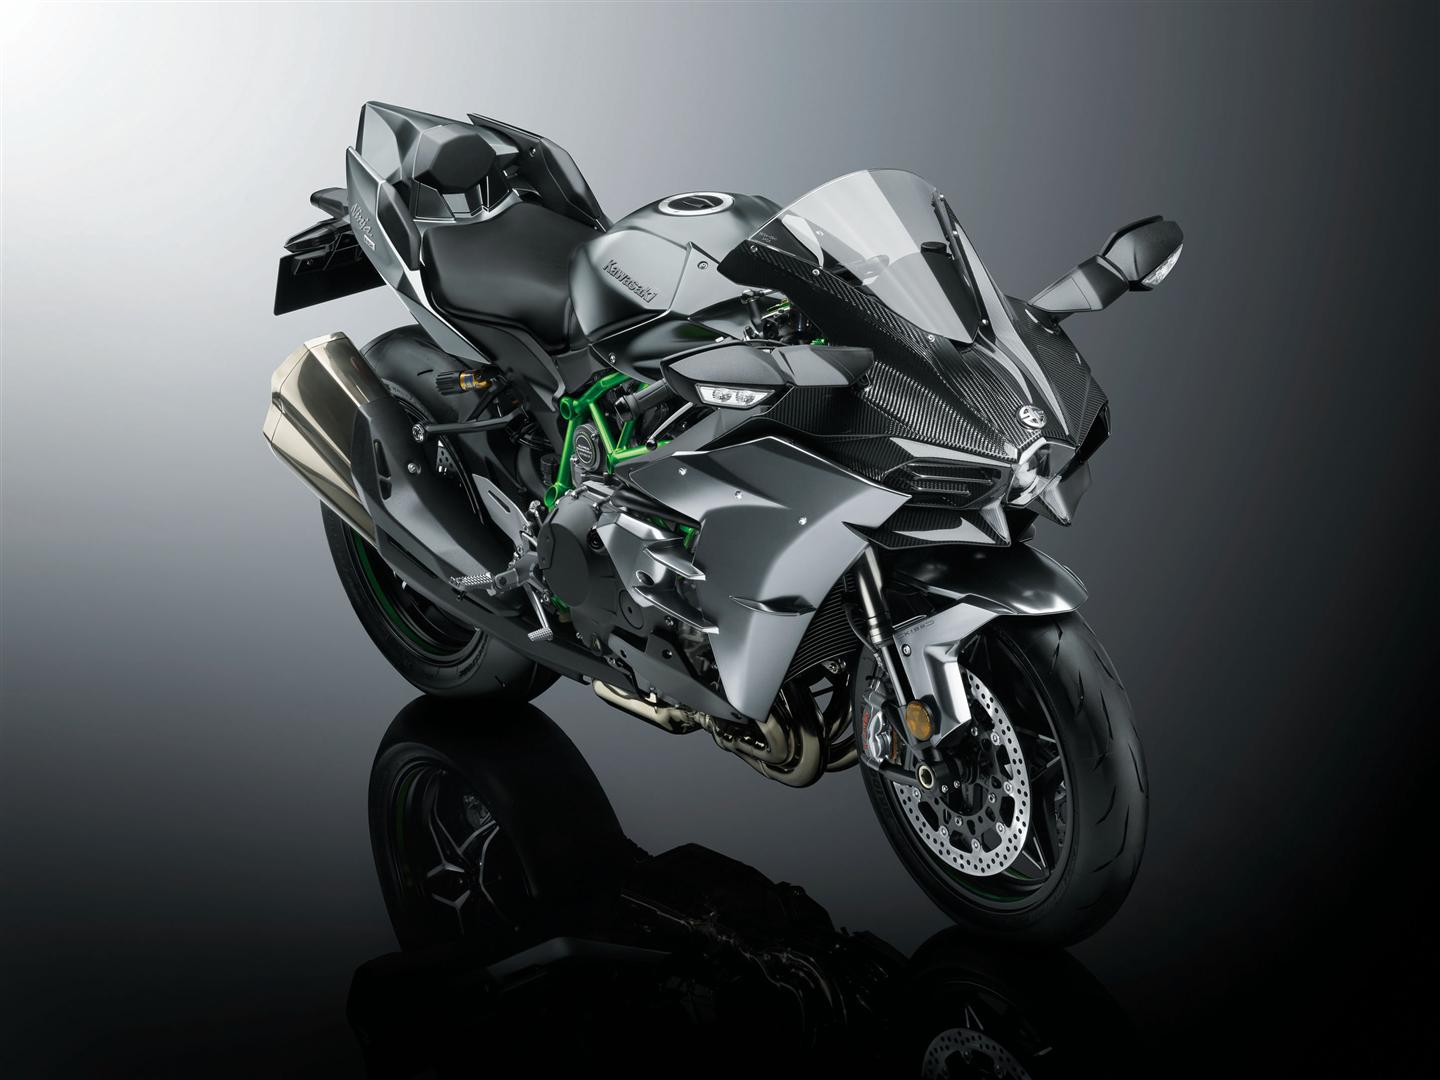 de i mellemtiden musiker Only Six 2017 Kawasaki H2 Carbon Units To Be Sold In The U.S. -  autoevolution